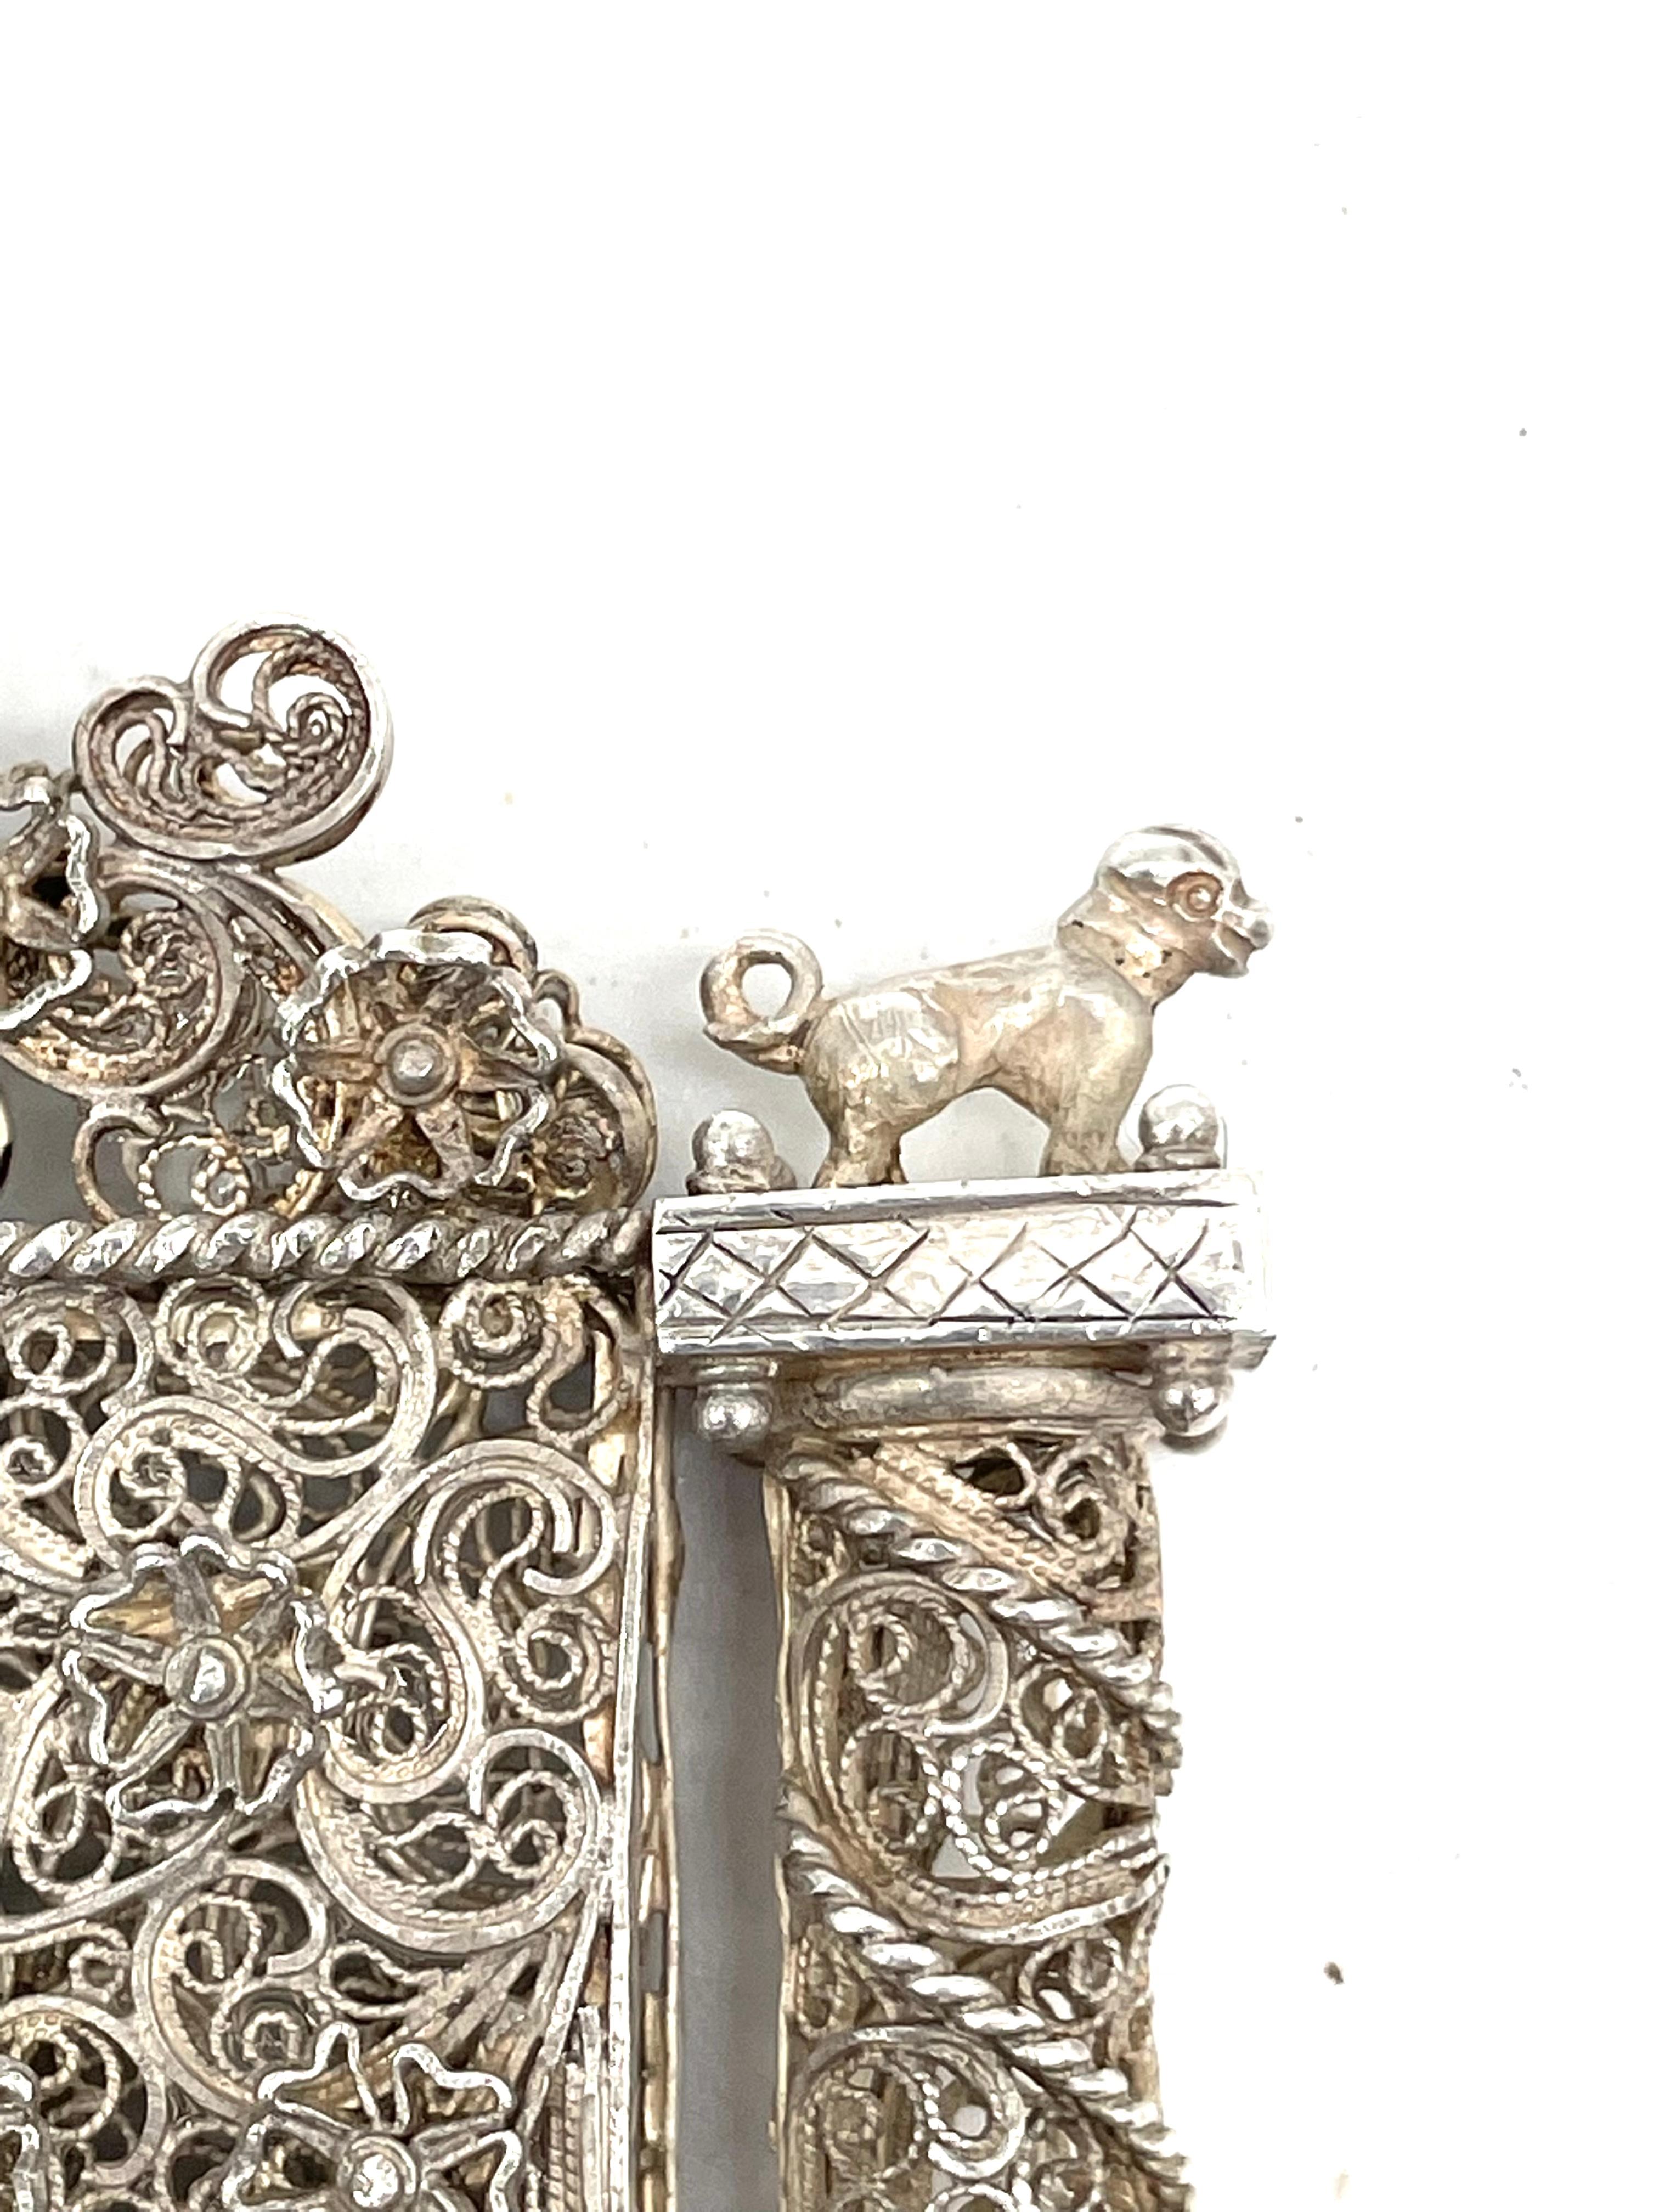 Handmade amulet with silver and silver filigree. A rectangular shape, flanked by two separated baroque columns topped by collared hounds, applied with flower-heads and centered on both sides by a shield with applied letters G-d.

Every item in